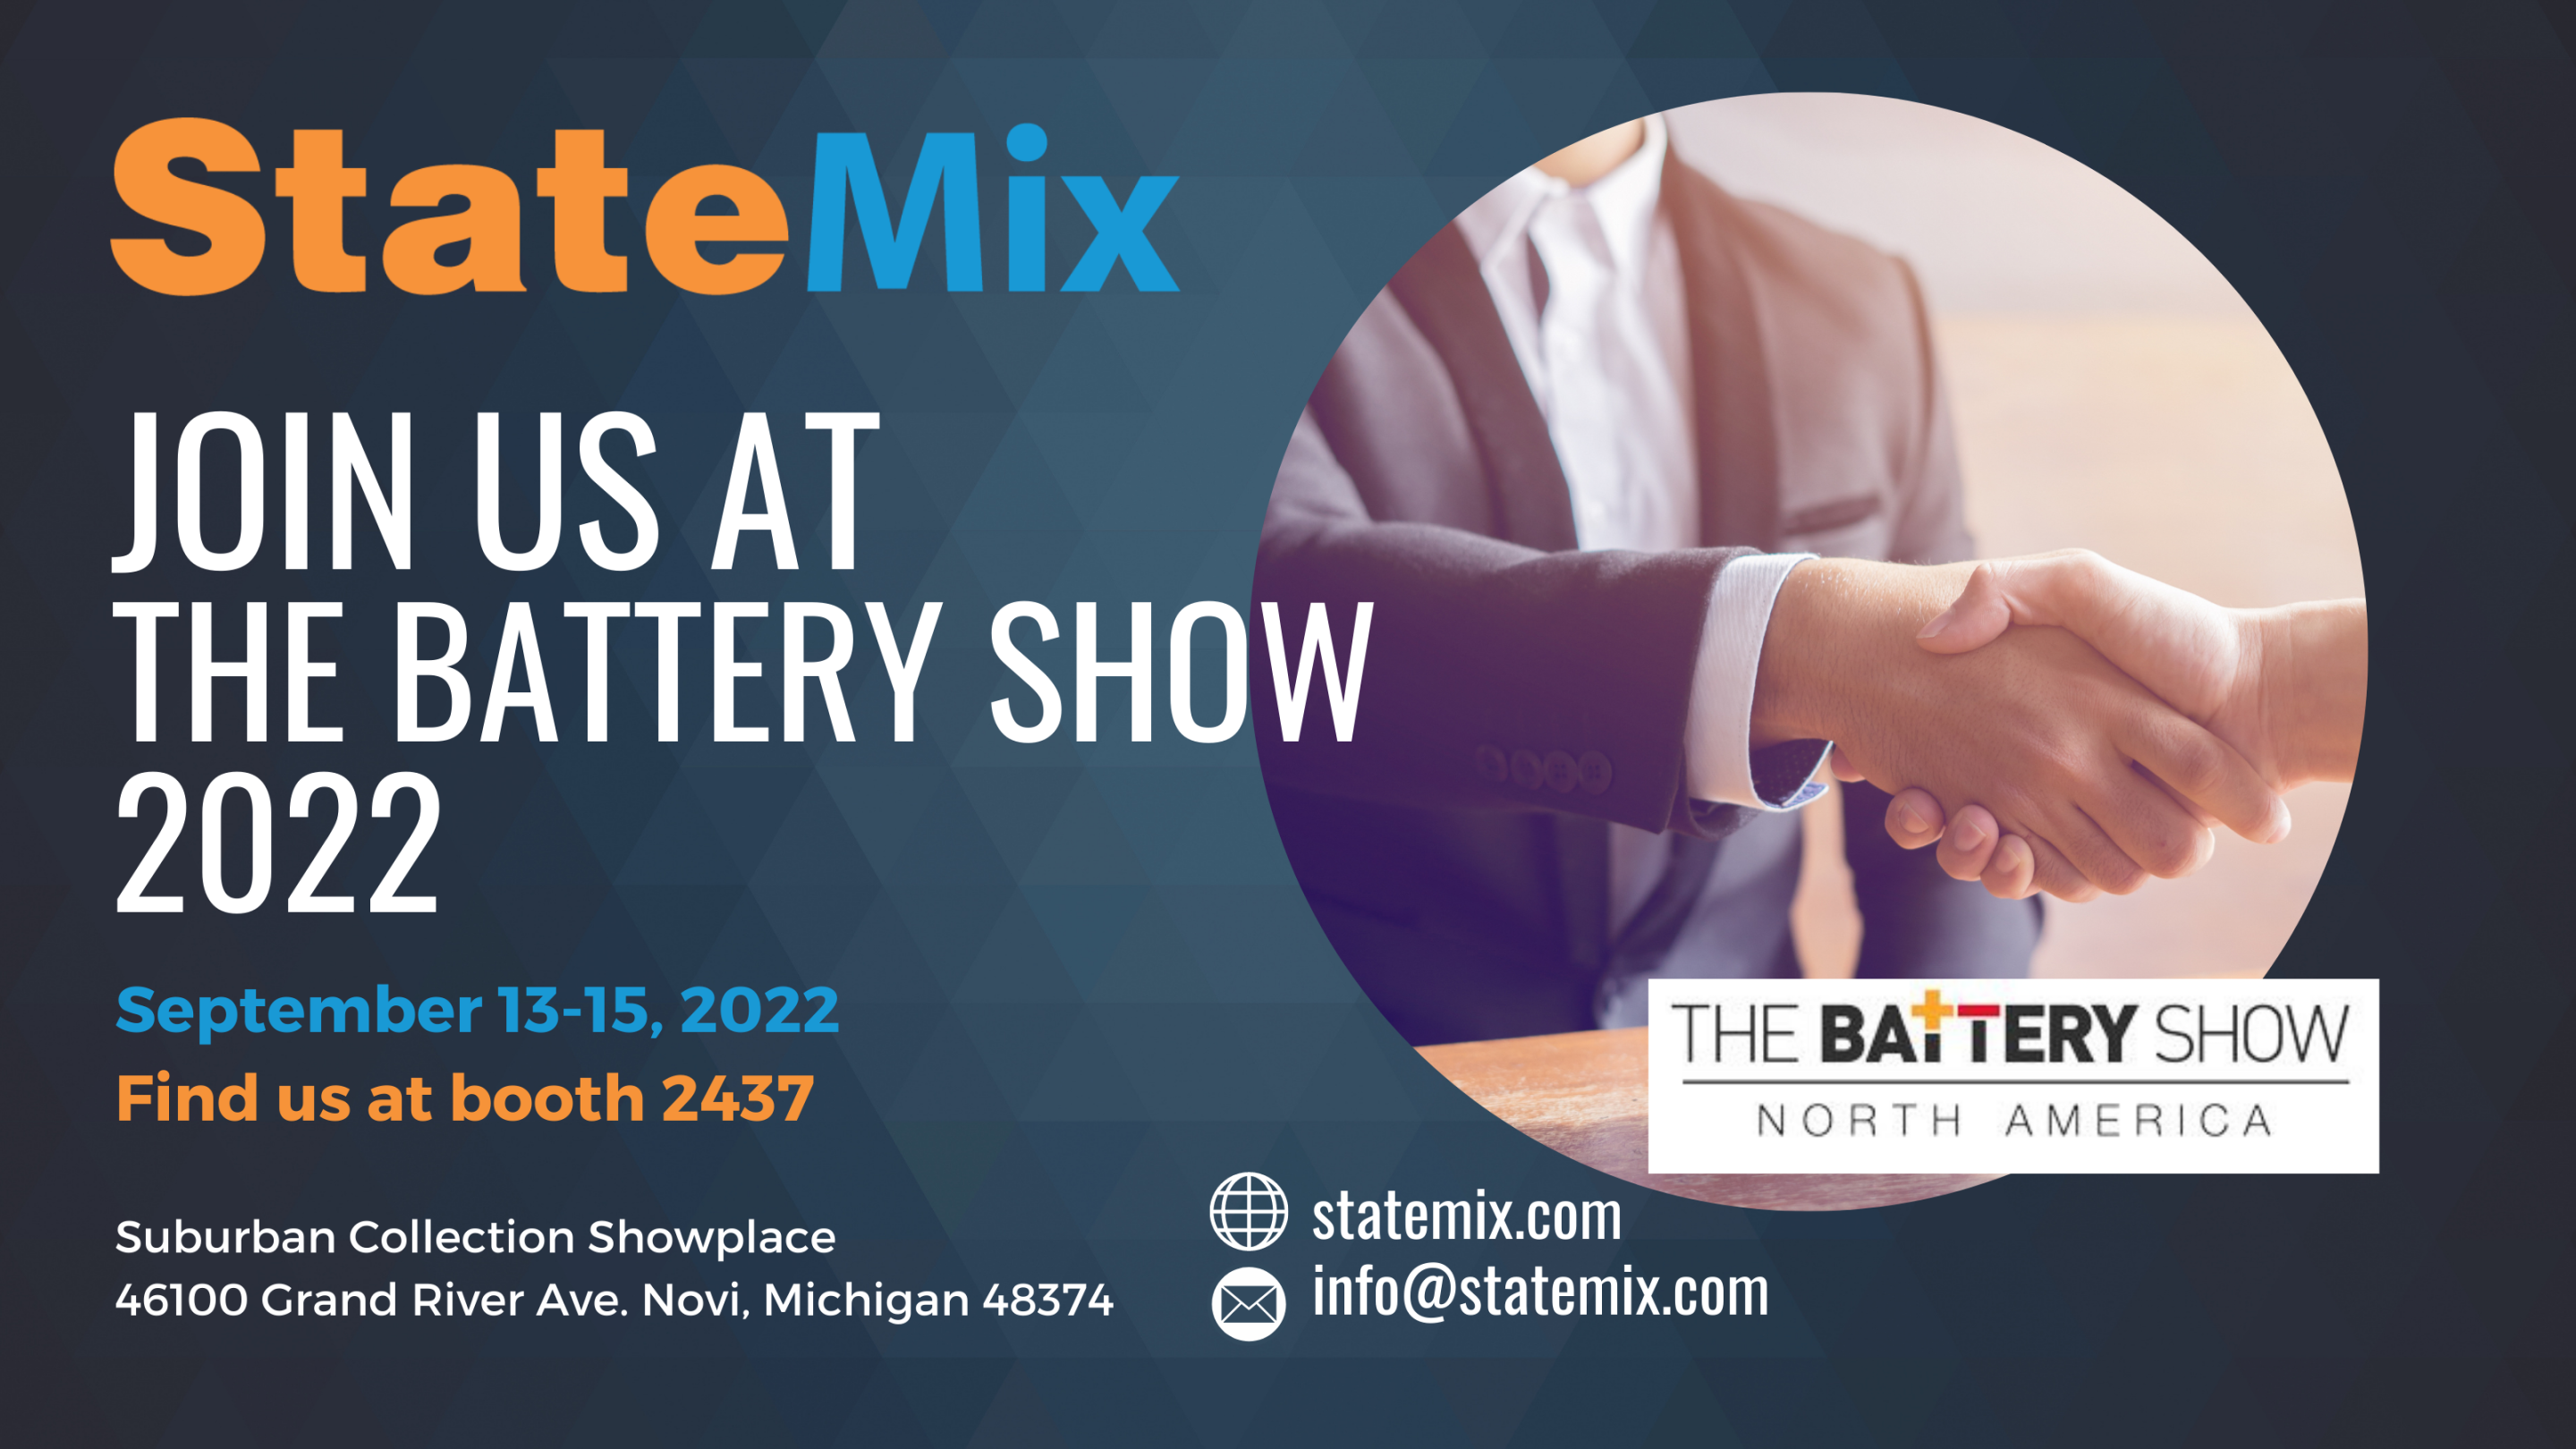 Join us at The Battery Show in Novi Michigan